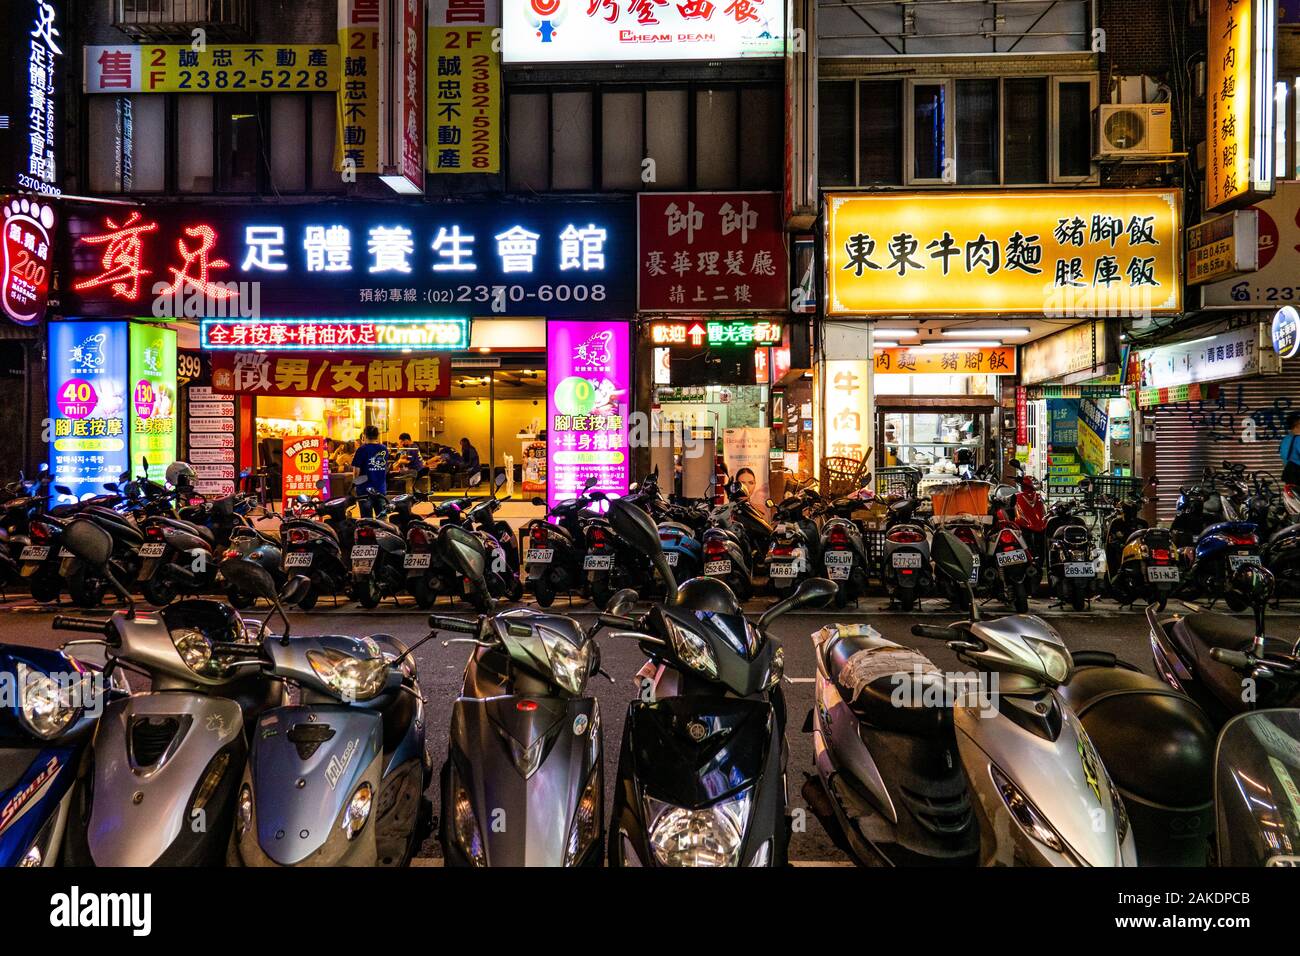 Countless motor scooters line the streets of Taipei Stock Photo